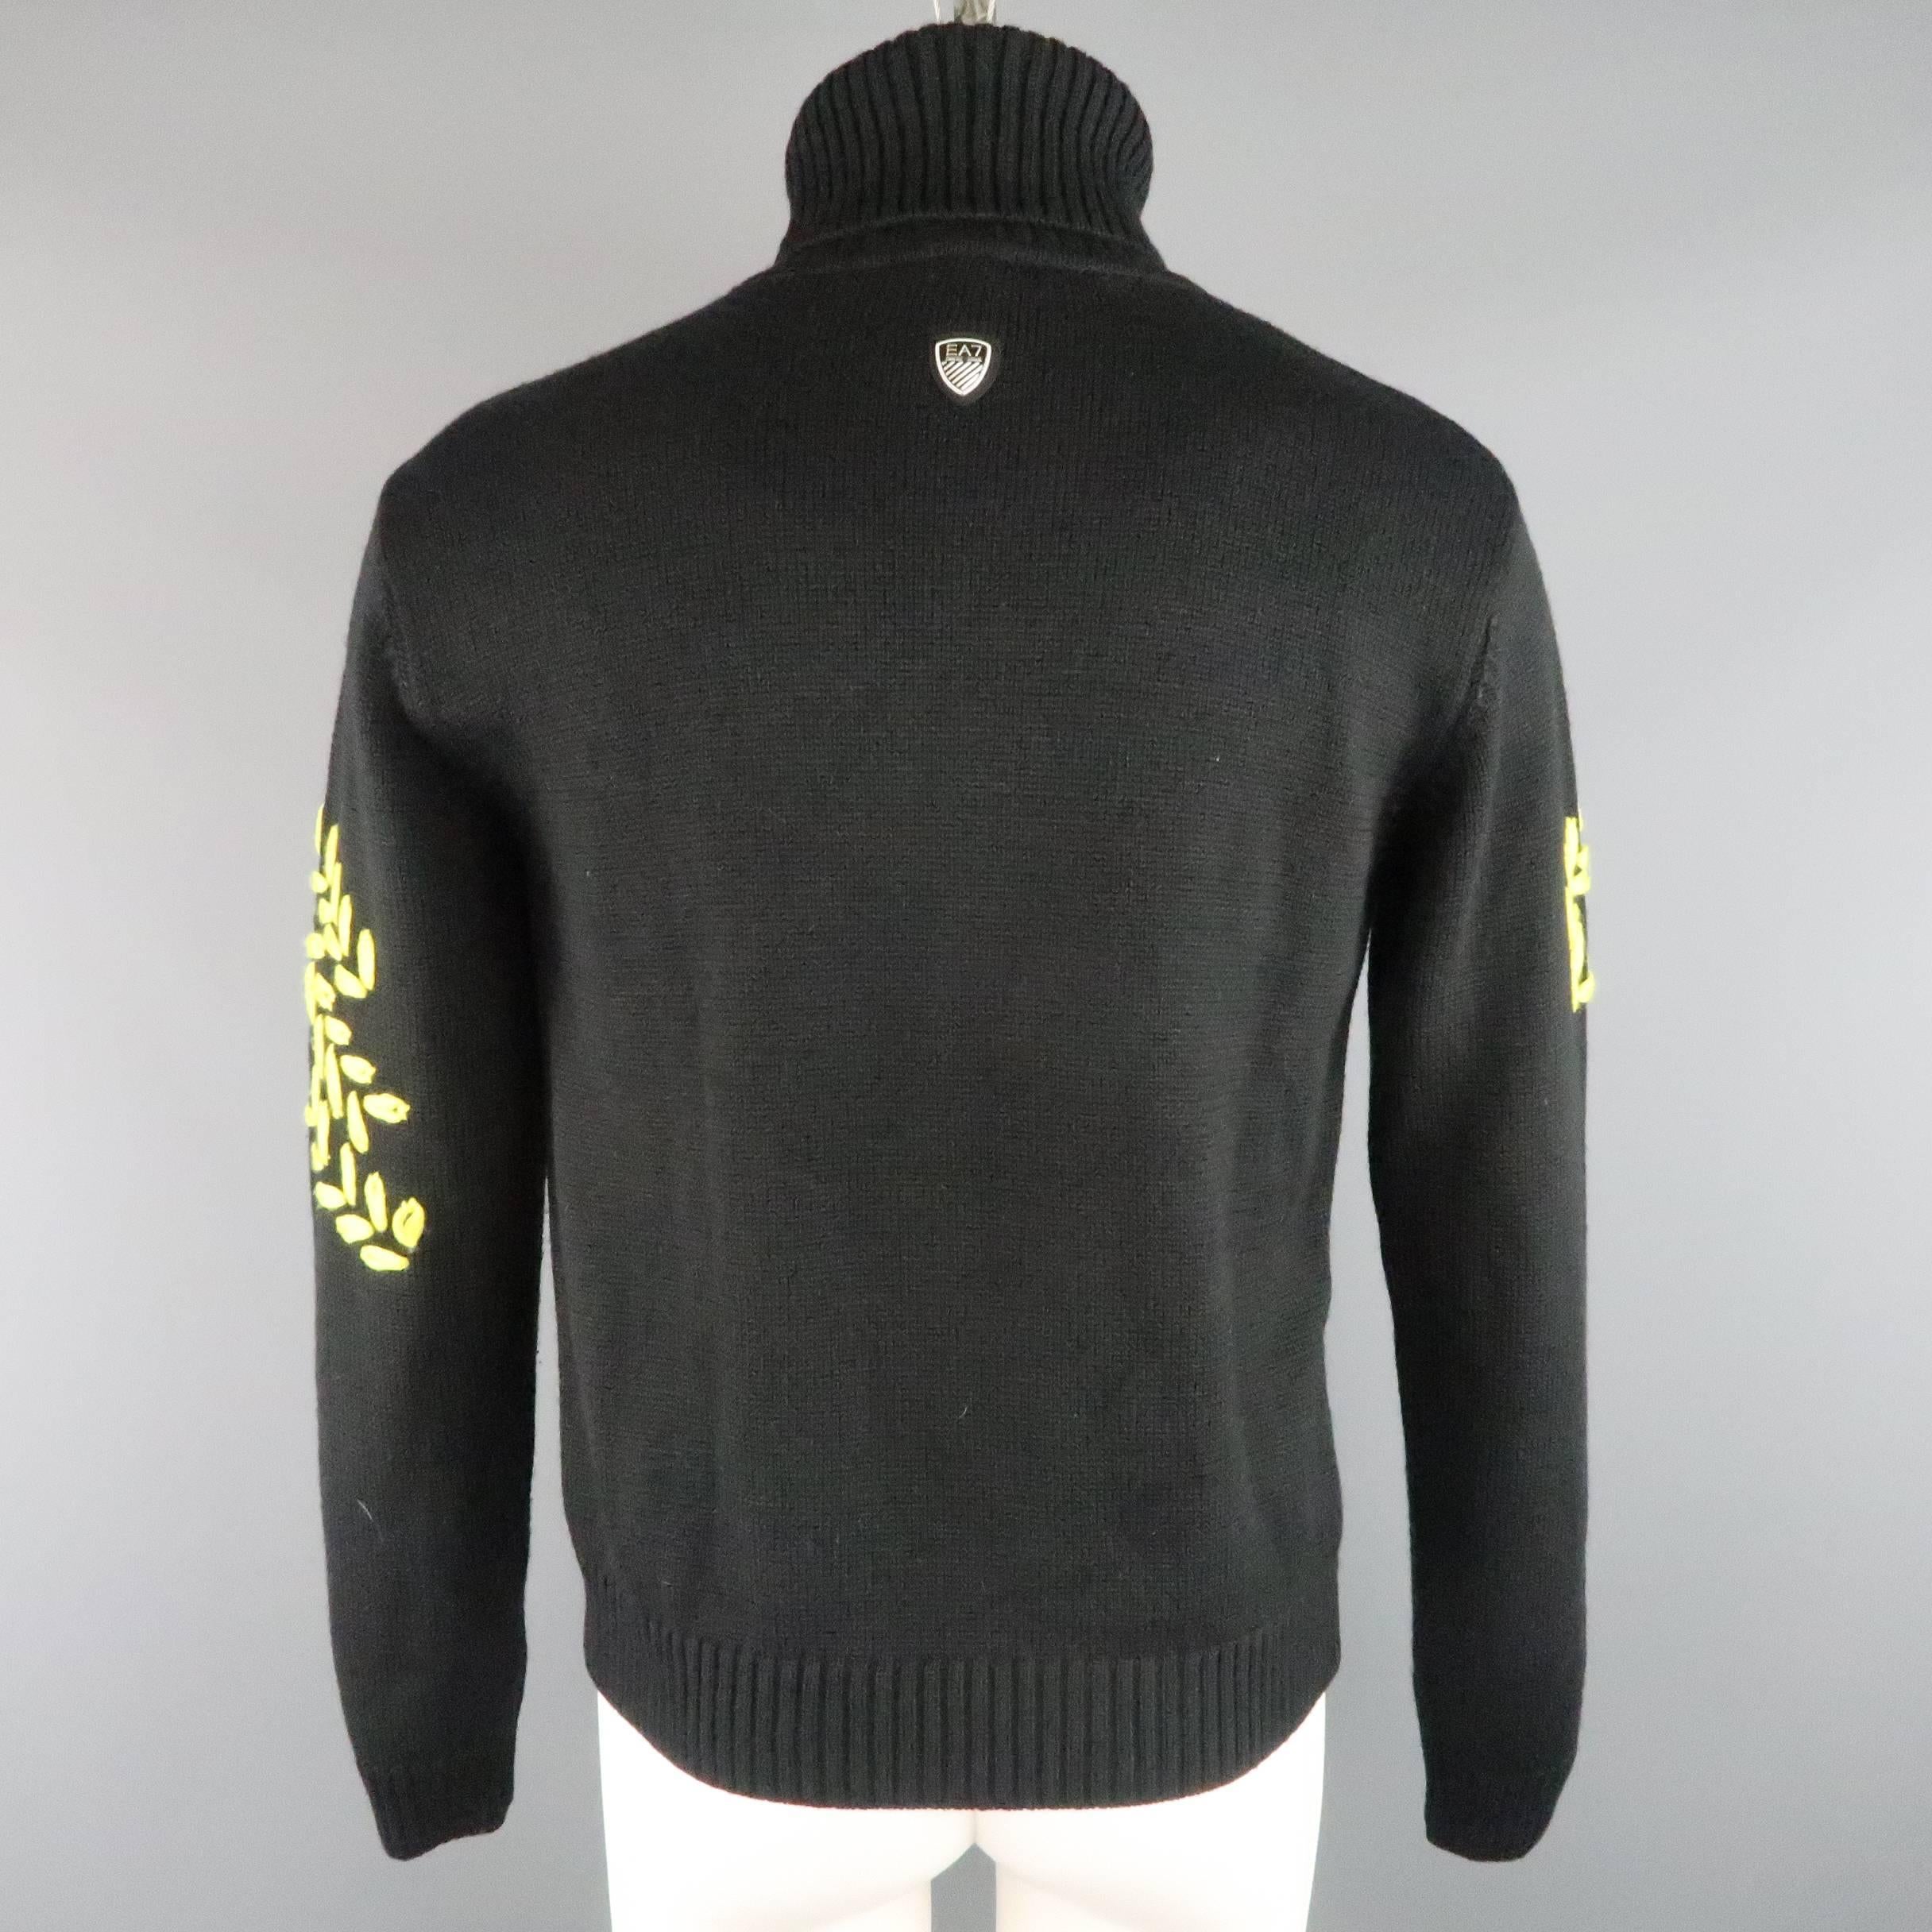 EMPORIO ARMANI EA7 S Black & Yellow Embroidered Wool Blend Turtleneck Sweater 3